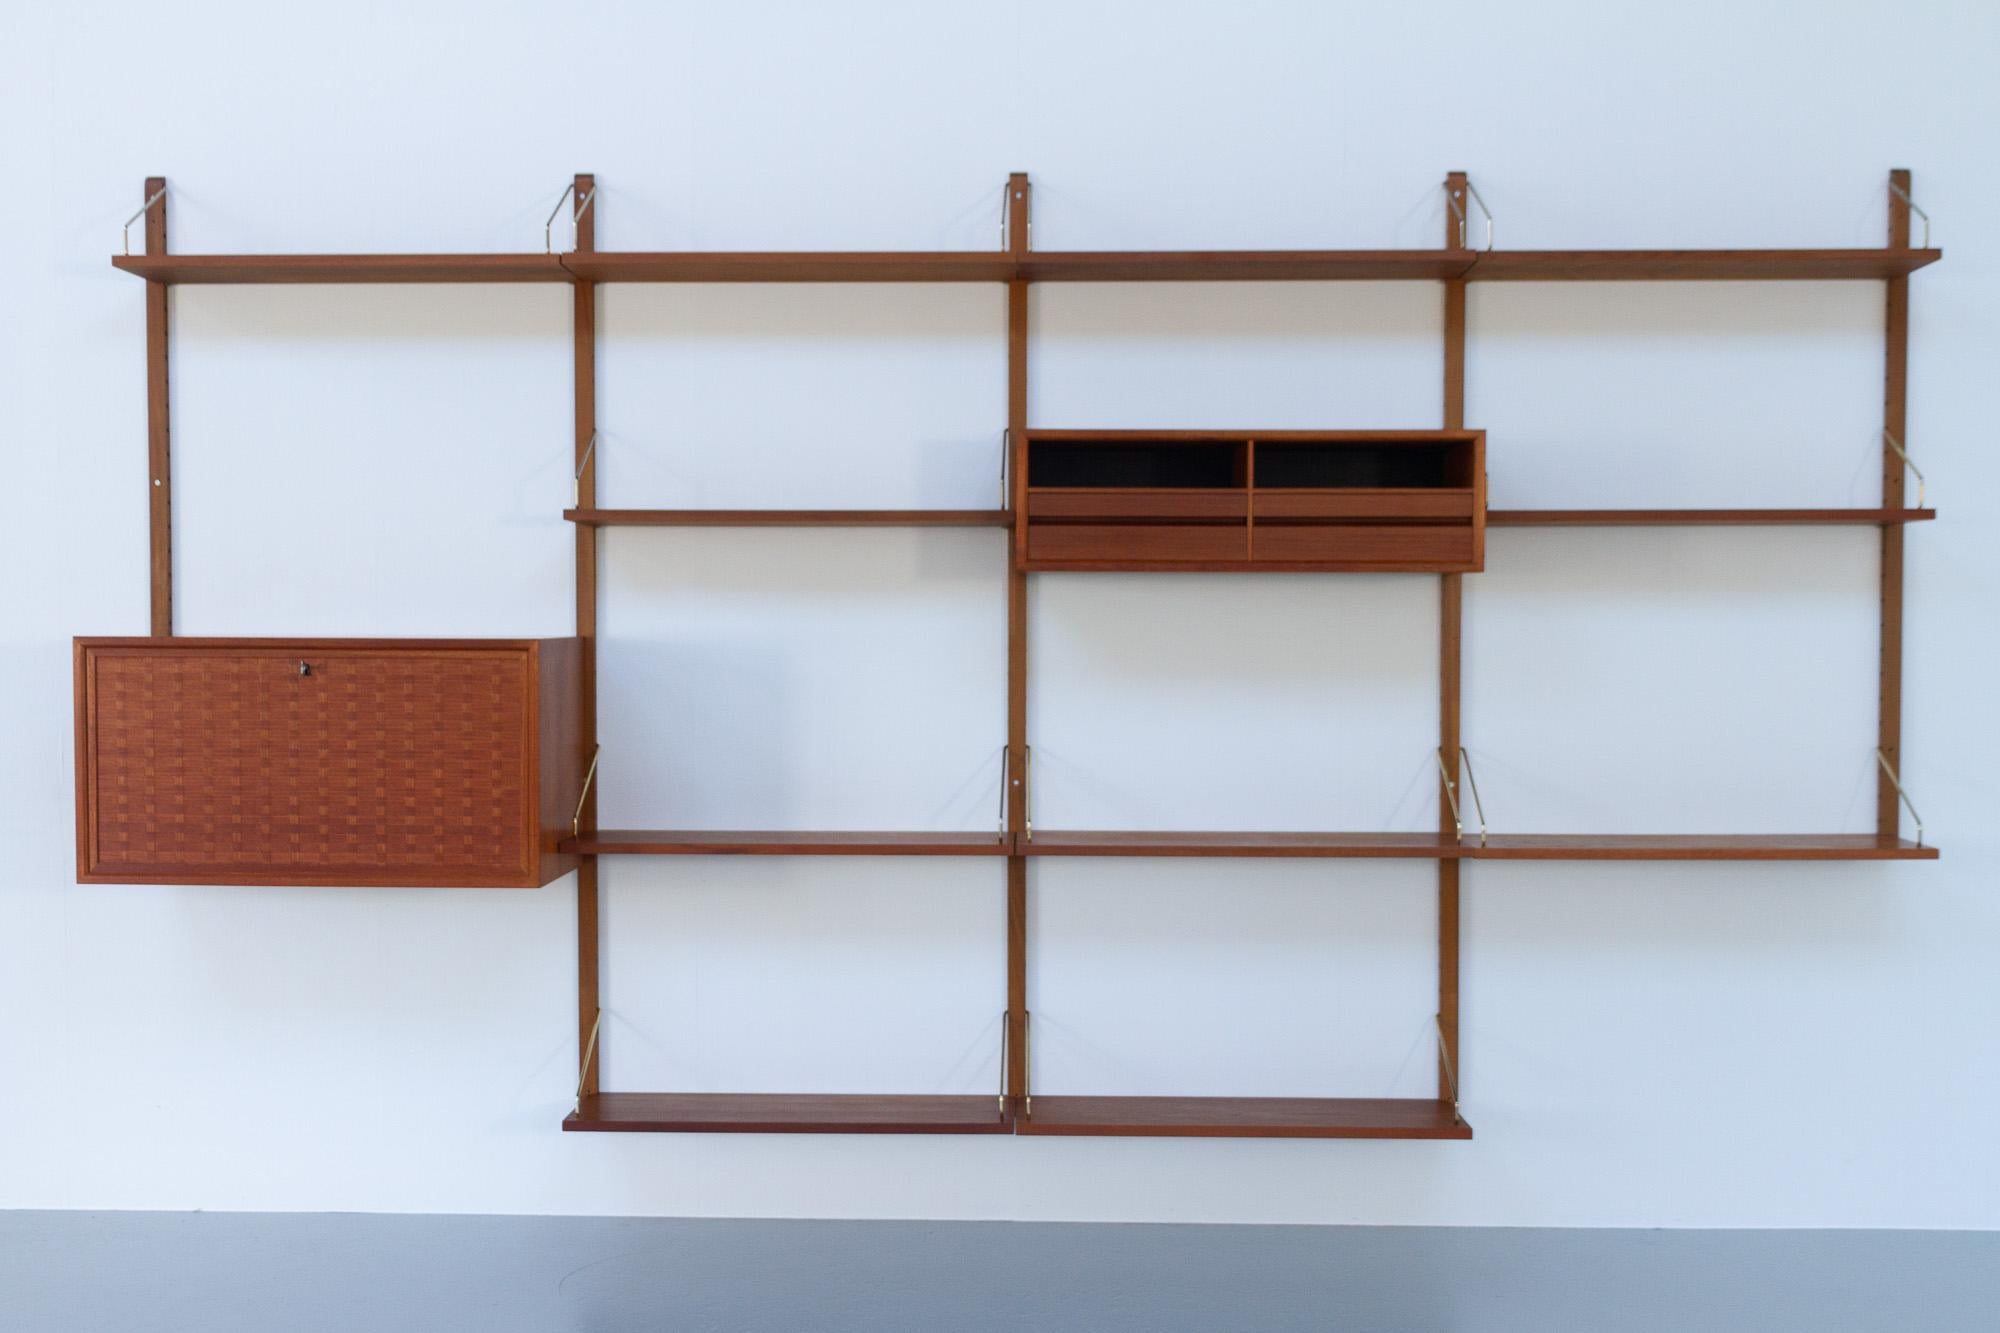 Vintage Danish teak wall unit by Poul Cadovius for Cado, 1960s.

Mid-Century Modern 4 bay shelving system model Royal. This is a original vintage floating bookcase designed in 1948 by Danish architect Poul Cadovius. 
Cadovius had the